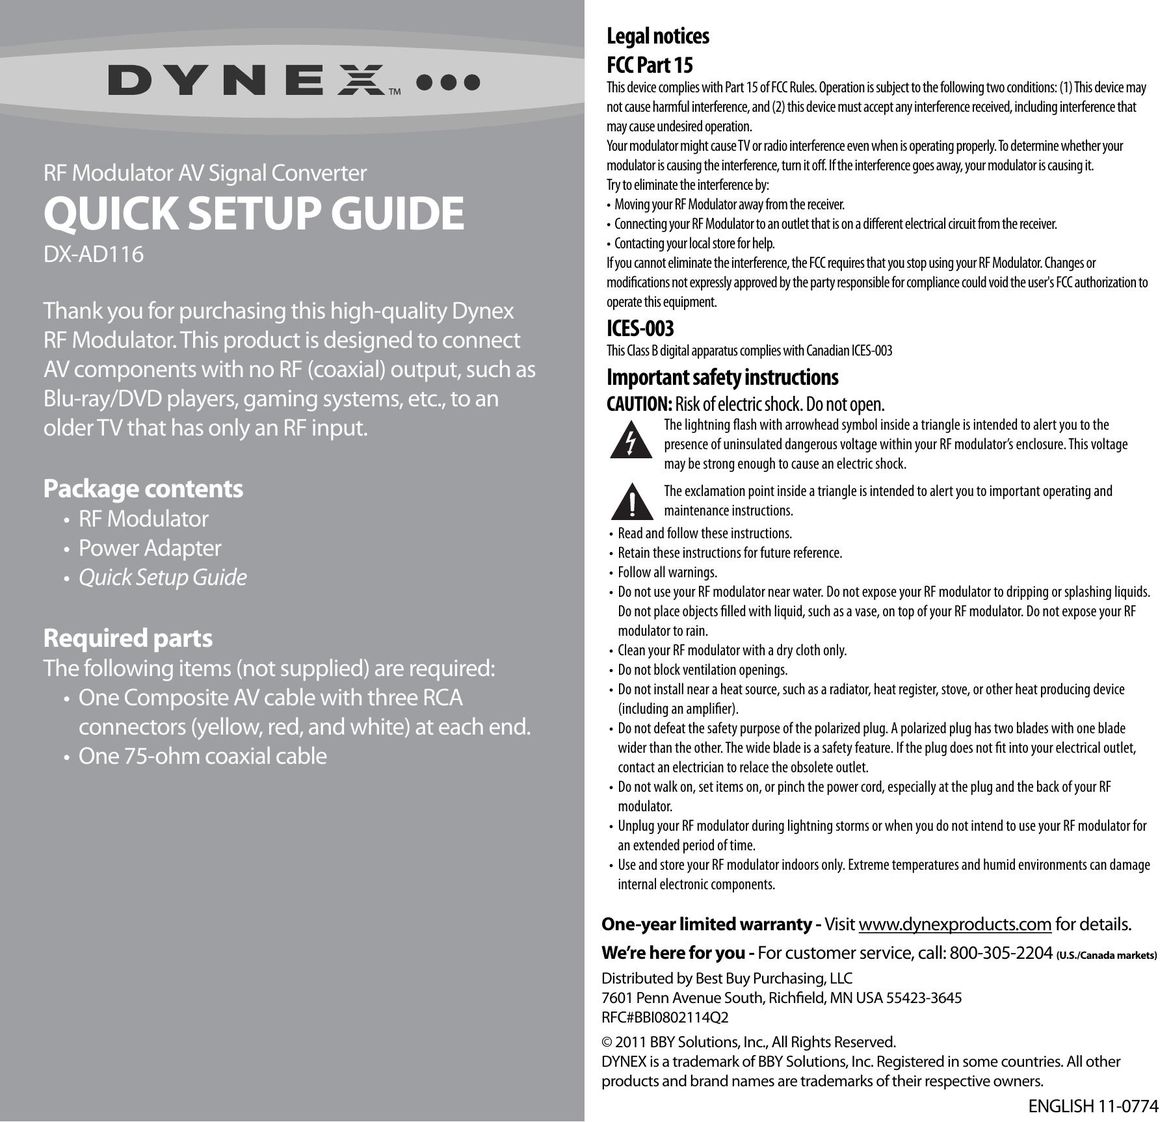 Dynex DX-AD116 Stereo System User Manual